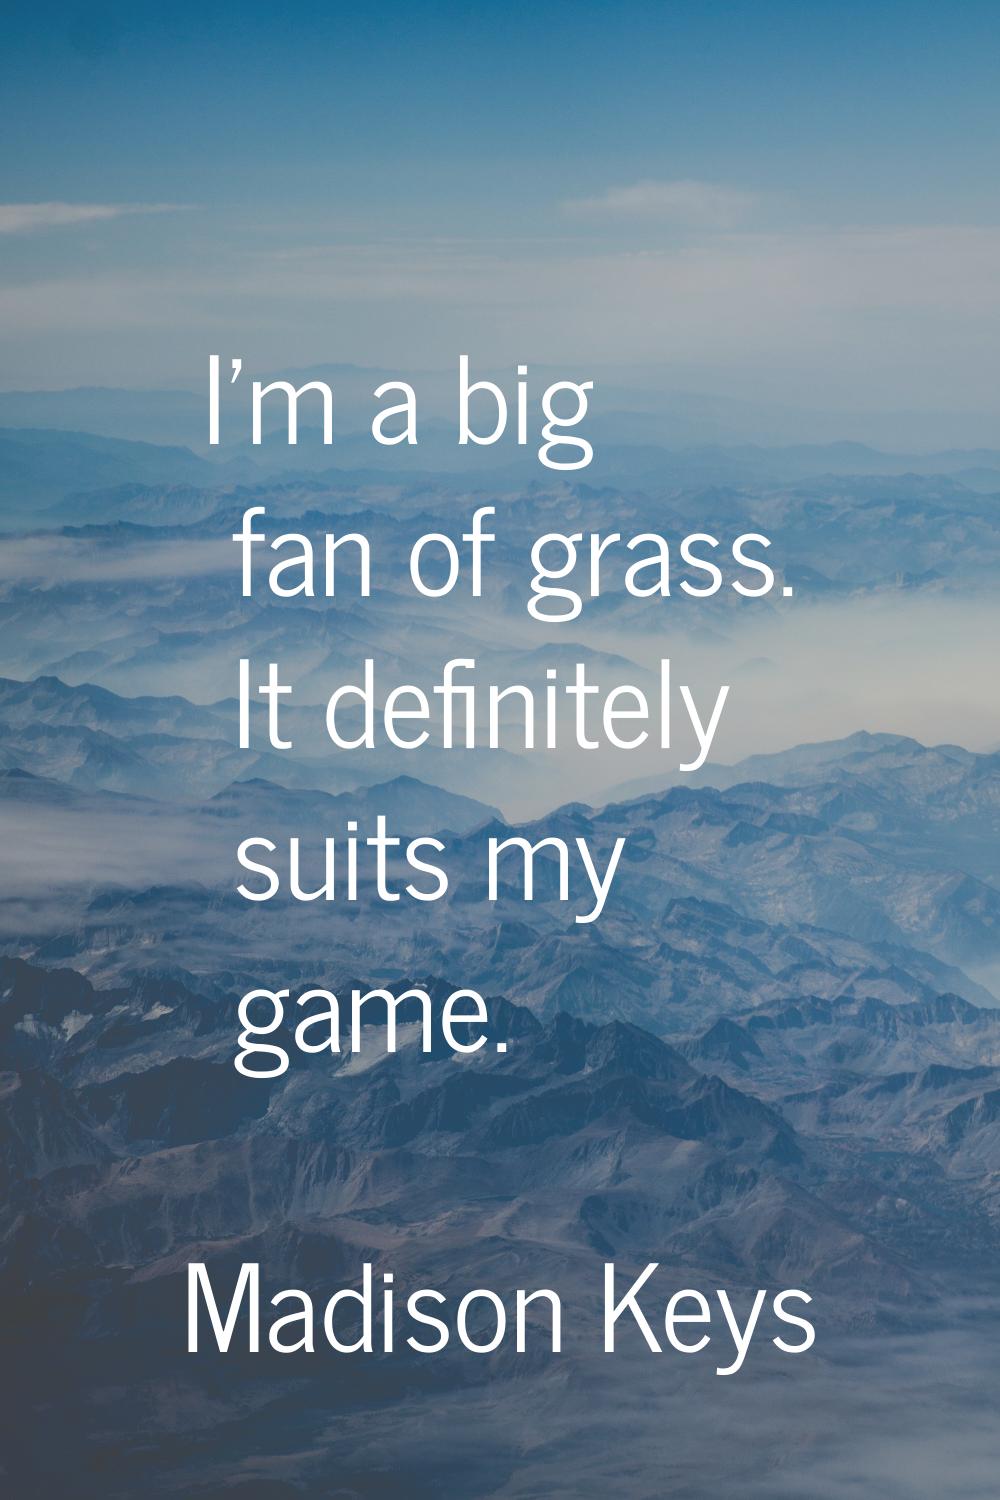 I'm a big fan of grass. It definitely suits my game.